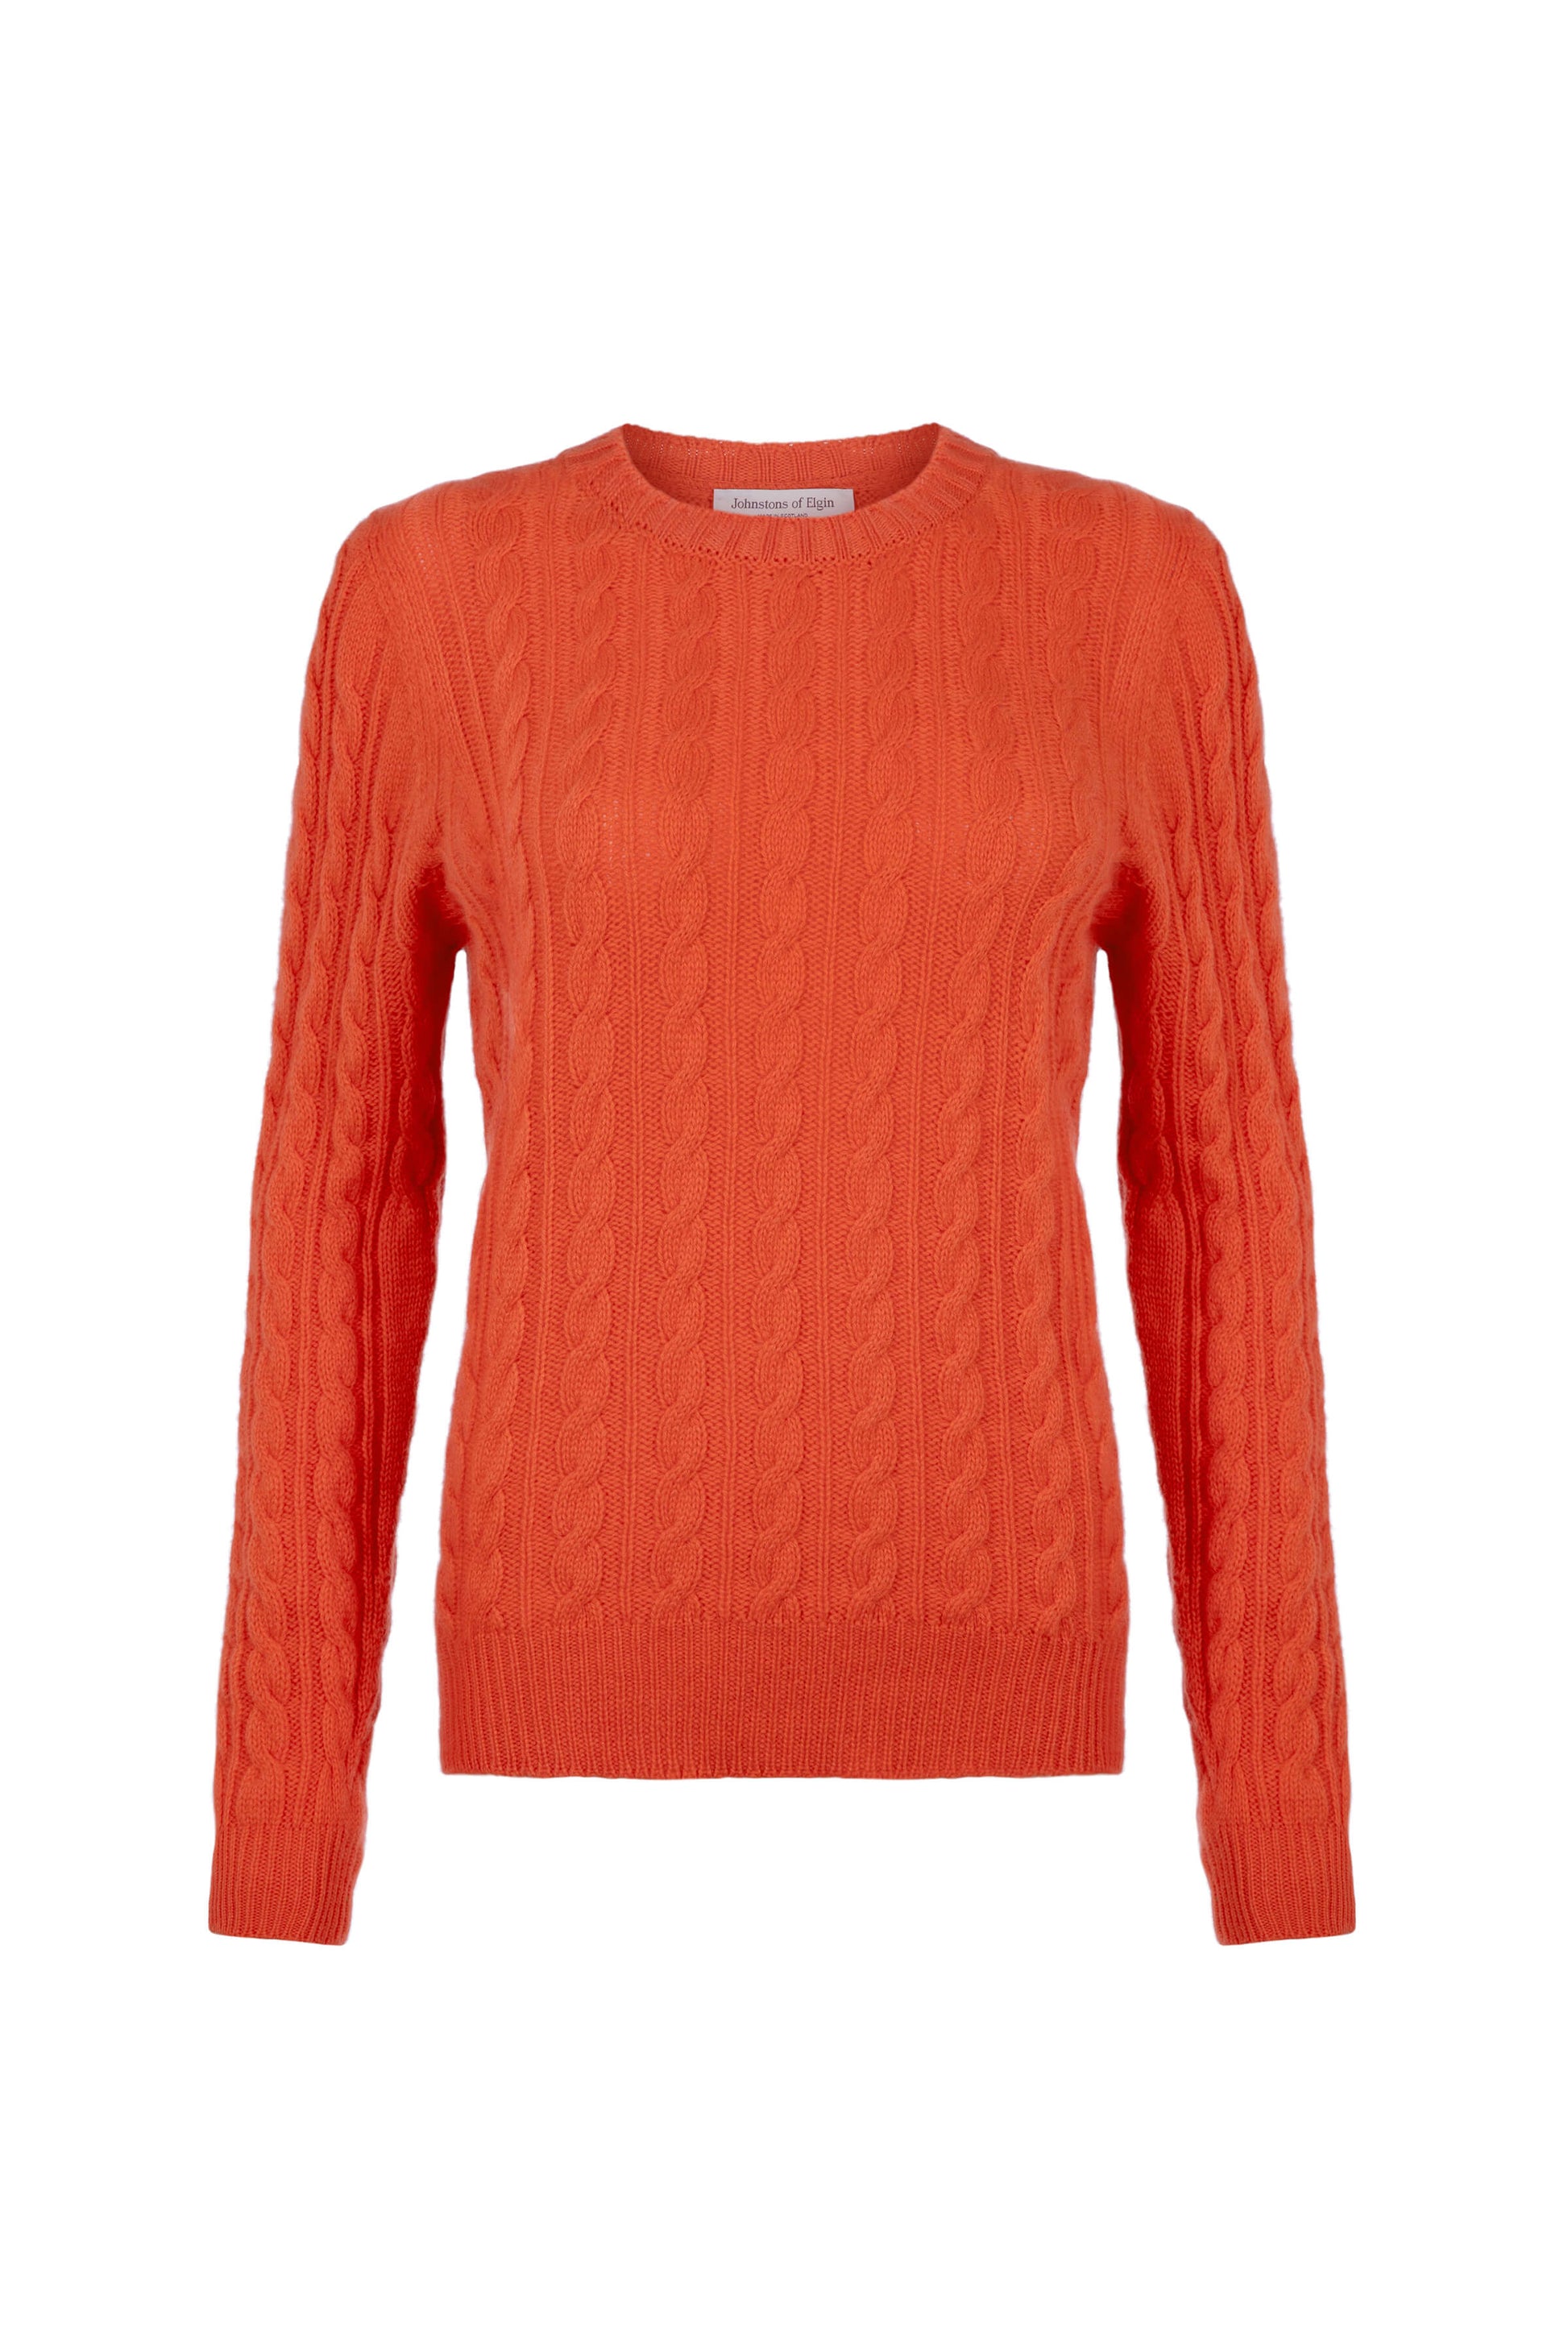 Johnstons of Elgin SS24 Women's Knitwear Coral Cable Cashmere Sweater KAI05085SG4262